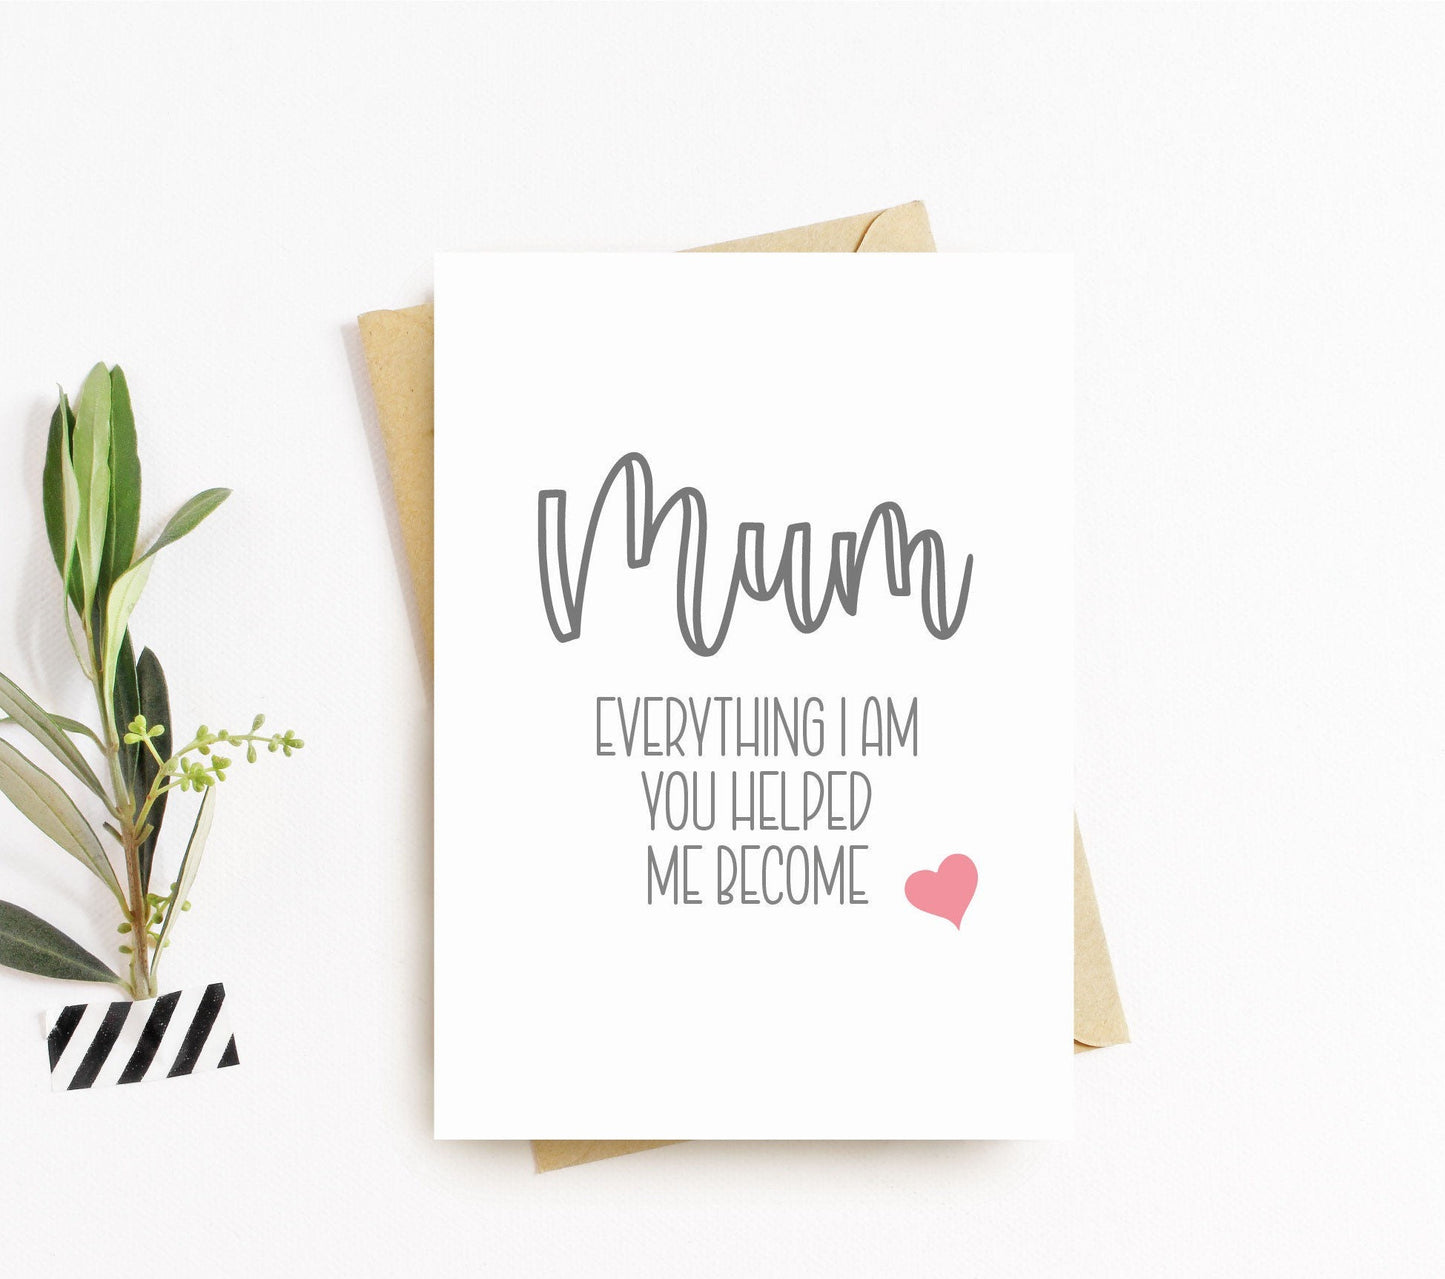 Mum Mother’s Day greeting card, mum birthday card, thank you mom, mam bday cards, Mothering Sunday cards, step mum cards, for grandma